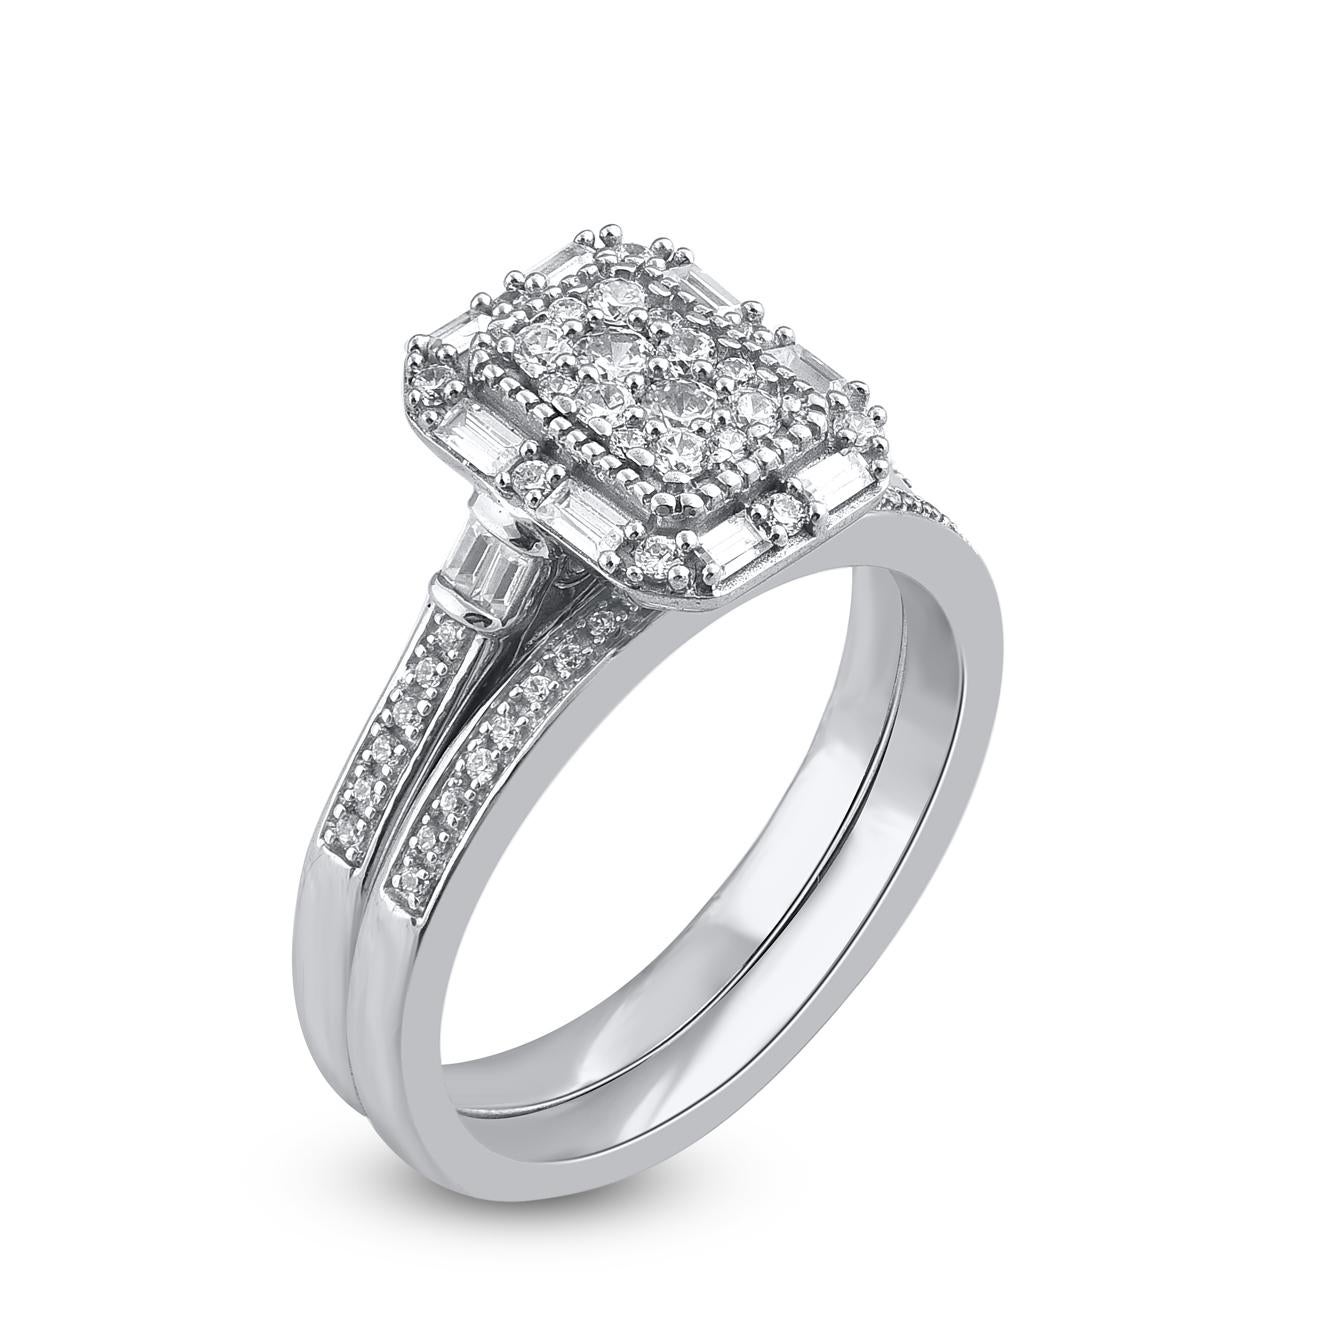 Express your love for her in the most classic way with this diamond ring set. Crafted in 14 Karat white gold. This wedding ring features a sparkling 67 brilliant cut, single cut round diamond & baguette cut diamond beautifully set in prong & channel